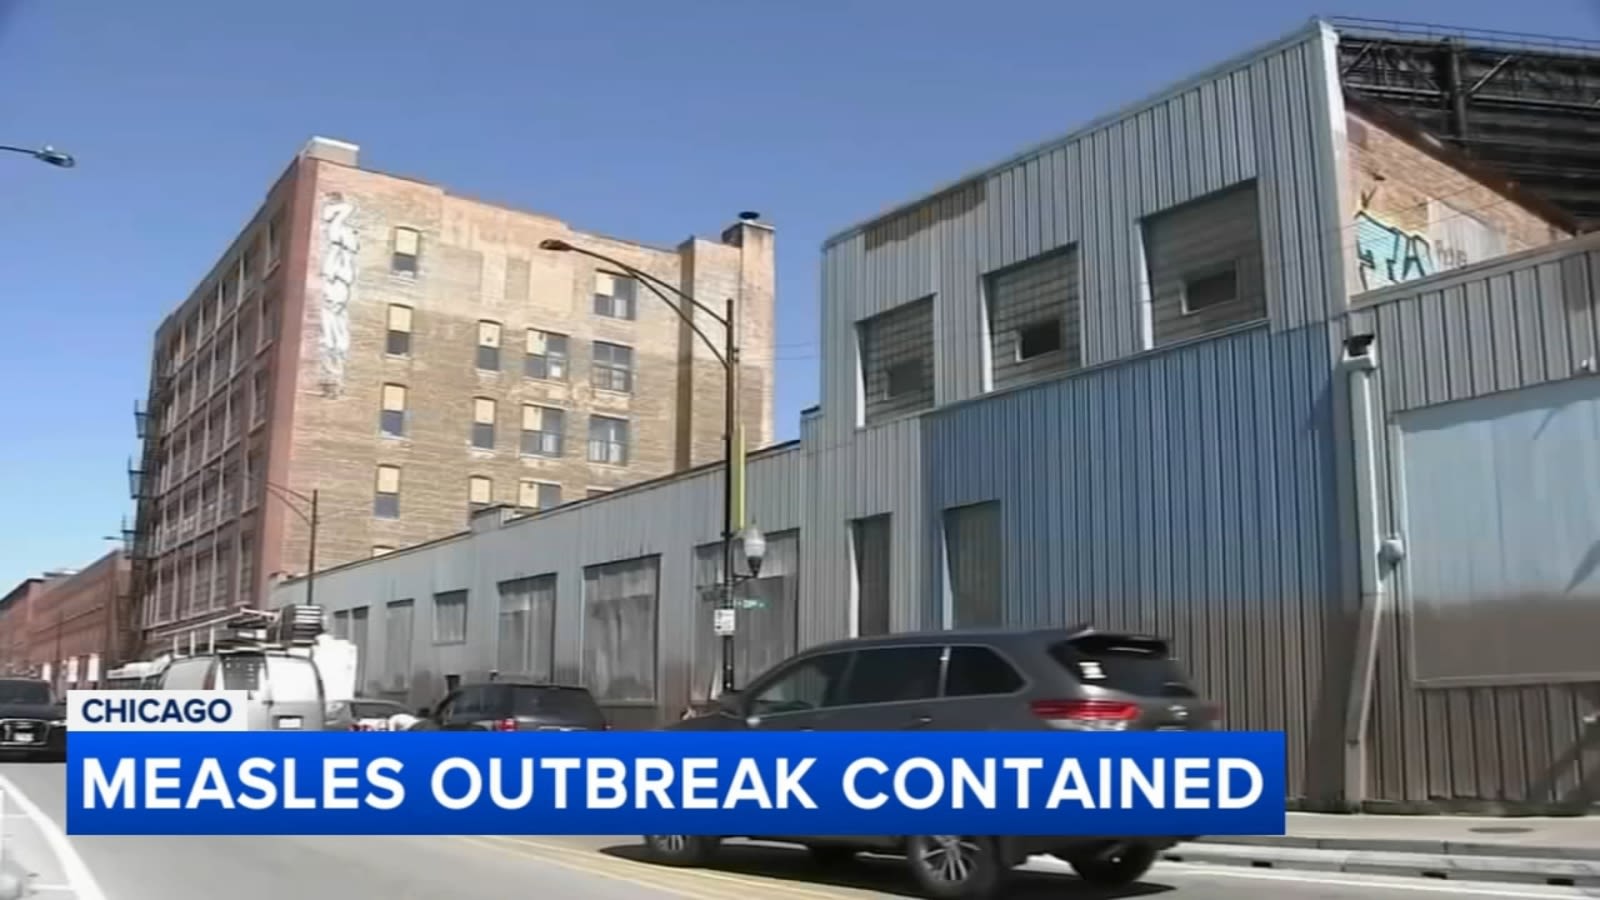 Chicago measles outbreak, worst in the U.S., is over after cases discovered at migrant shelter